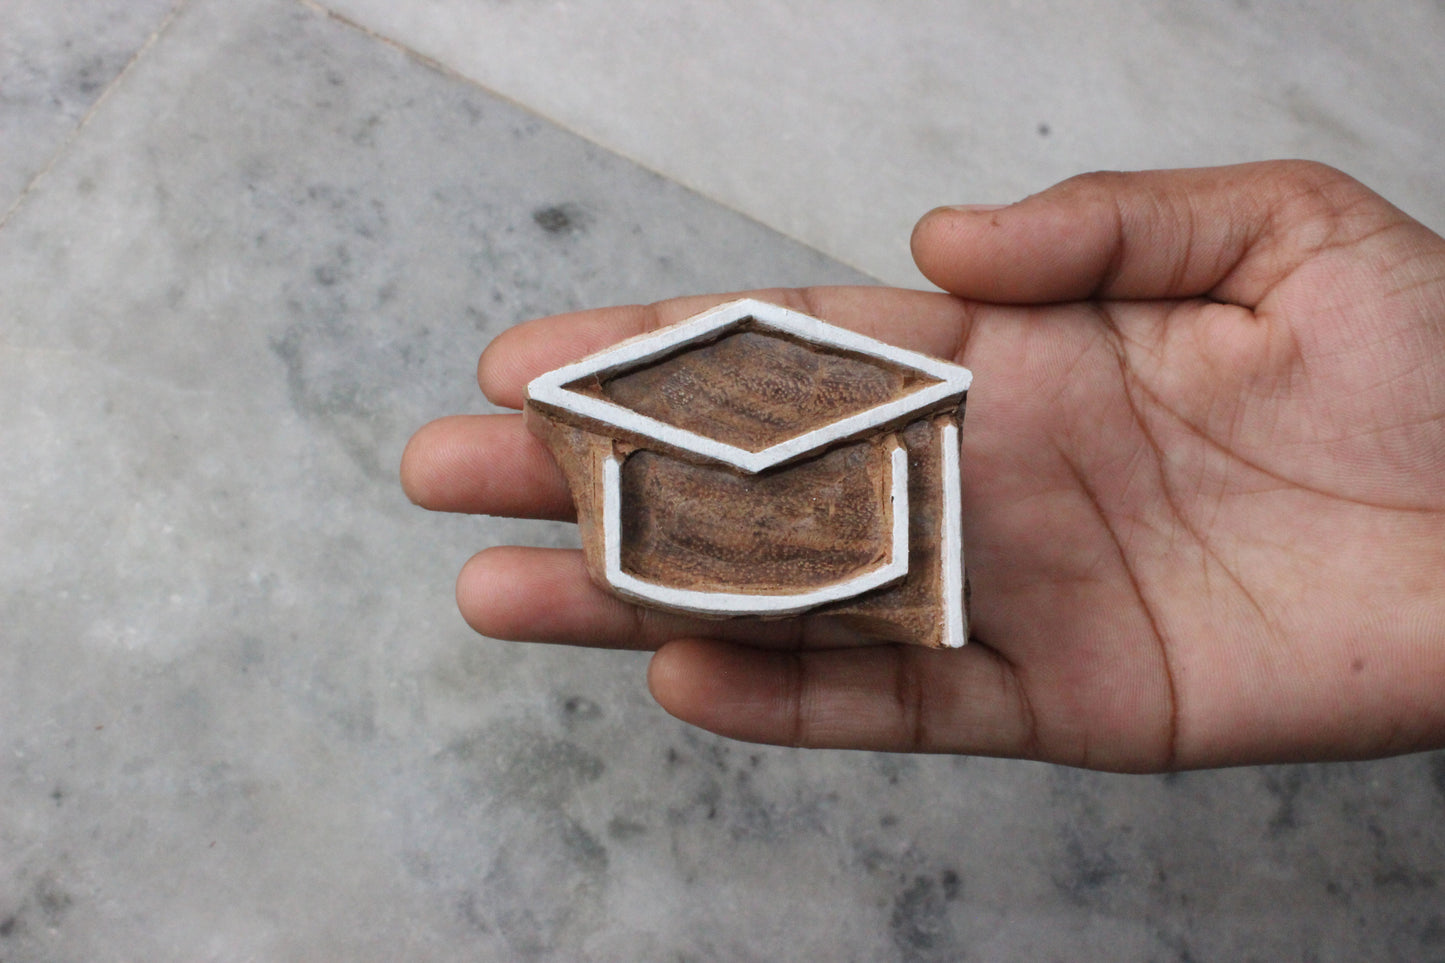 Graduation Block Print Stamp Indian Stamp Lawyer Fabric Stamp Hand Carved Textile Block For Printing Carve Block Soap Stamp Traditional Textile Printing Block